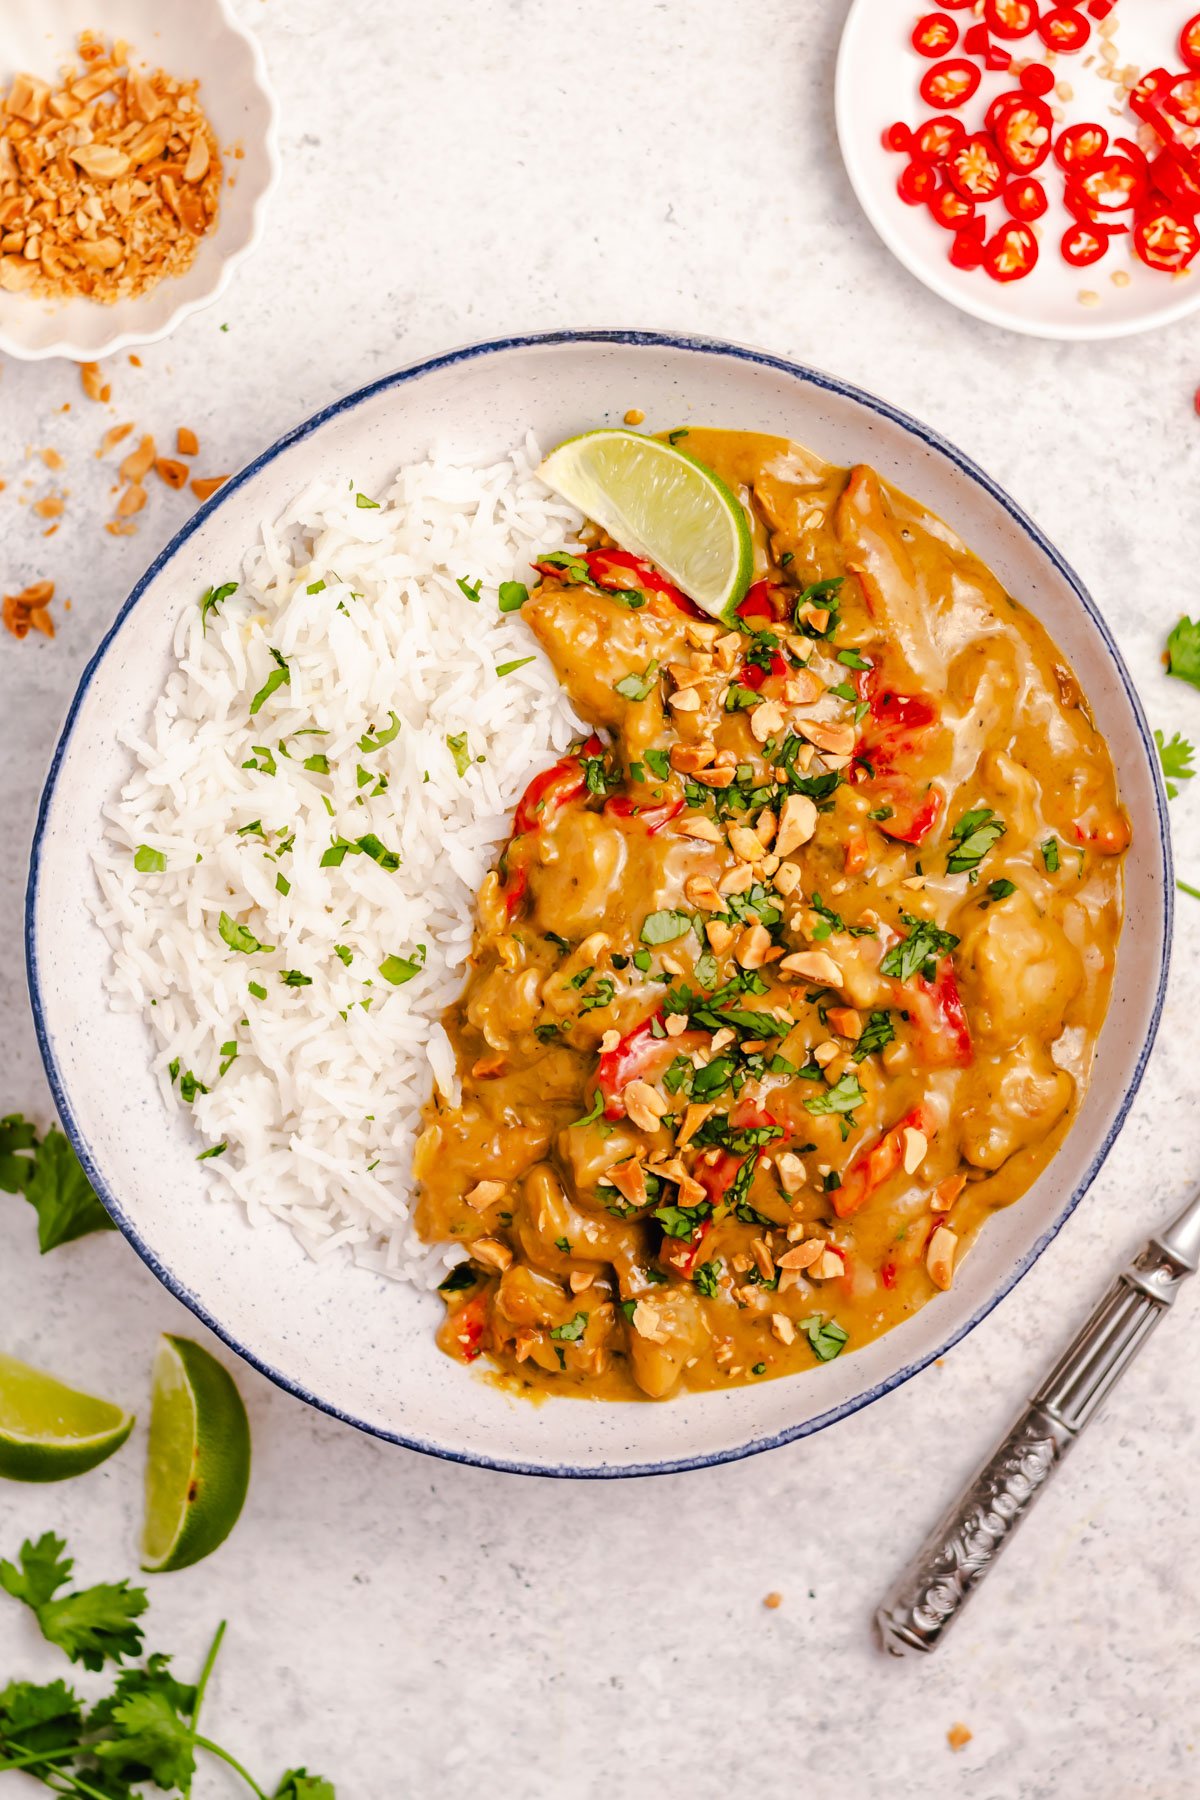 This peanut butter chicken skillet is a super easy one pot meal. It is naturally dairy free and gluten free and the combination of the spices, chicken, and peanut butter make for a hearty, fulfilling dish. It takes less than 20 minutes from start to finish for a dinner that the whole family will love! #dairyfreerecipes #glutenfreerecipes #glutenfreedairyfreerecipes #healthychickenrecipes #healthydinnerrecipes #30minutemeals